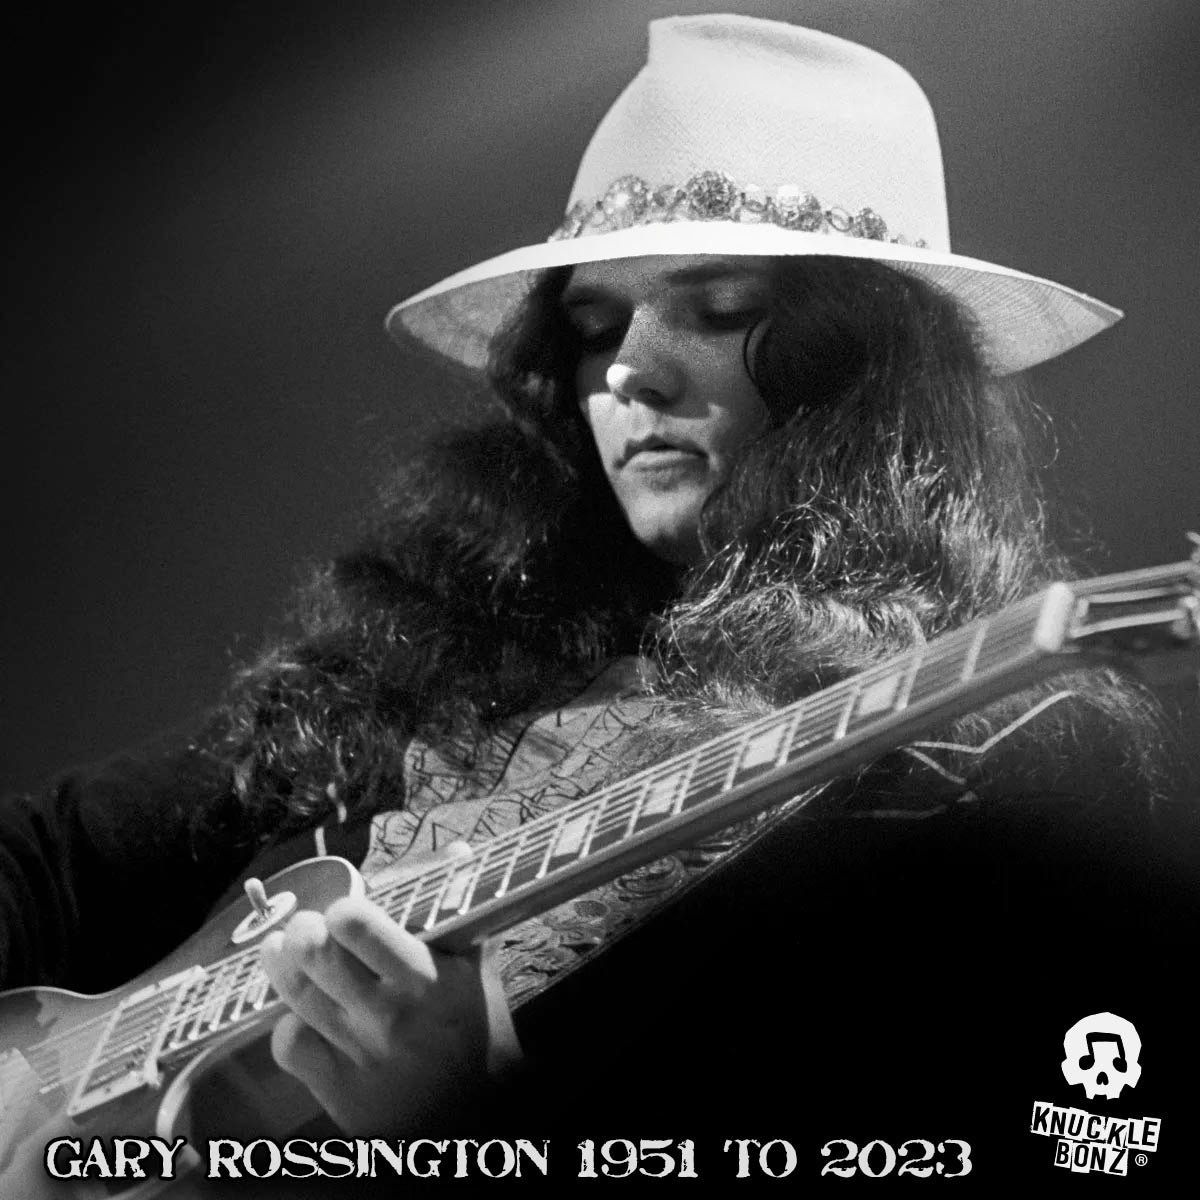 Sadness for Southern Rock - Founding Lynyrd Skynyrd Guitarist Gary Rossington Passes at 71